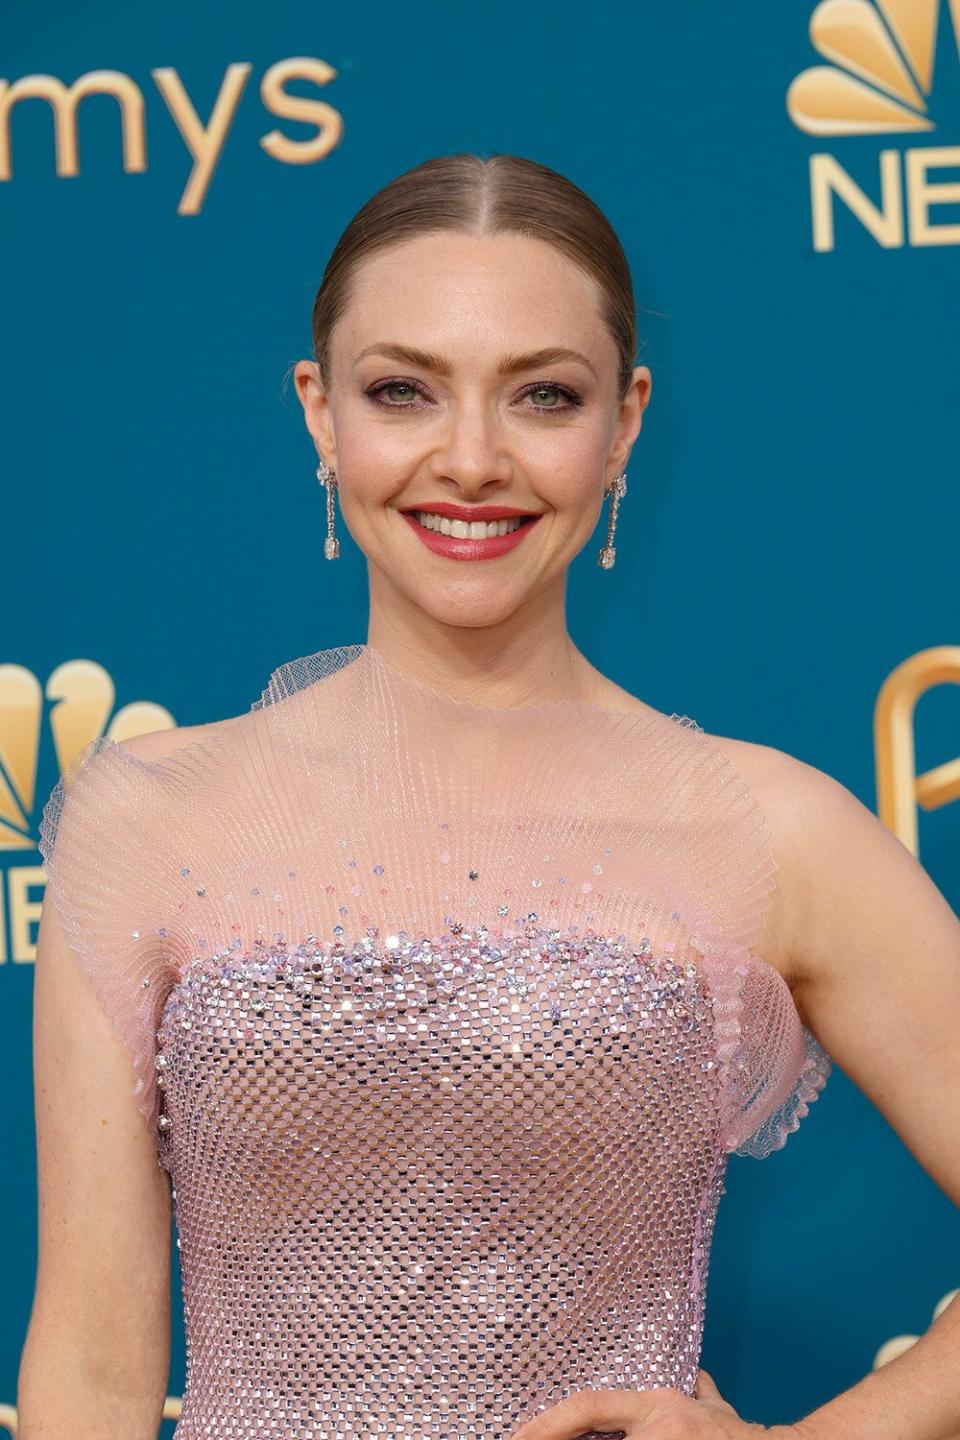 LOS ANGELES, CALIFORNIA - SEPTEMBER 12: Amanda Seyfried attends the 74th Primetime Emmys at Microsoft Theater on September 12, 2022 in Los Angeles, California. (Photo by Frazer Harrison/Getty Images)